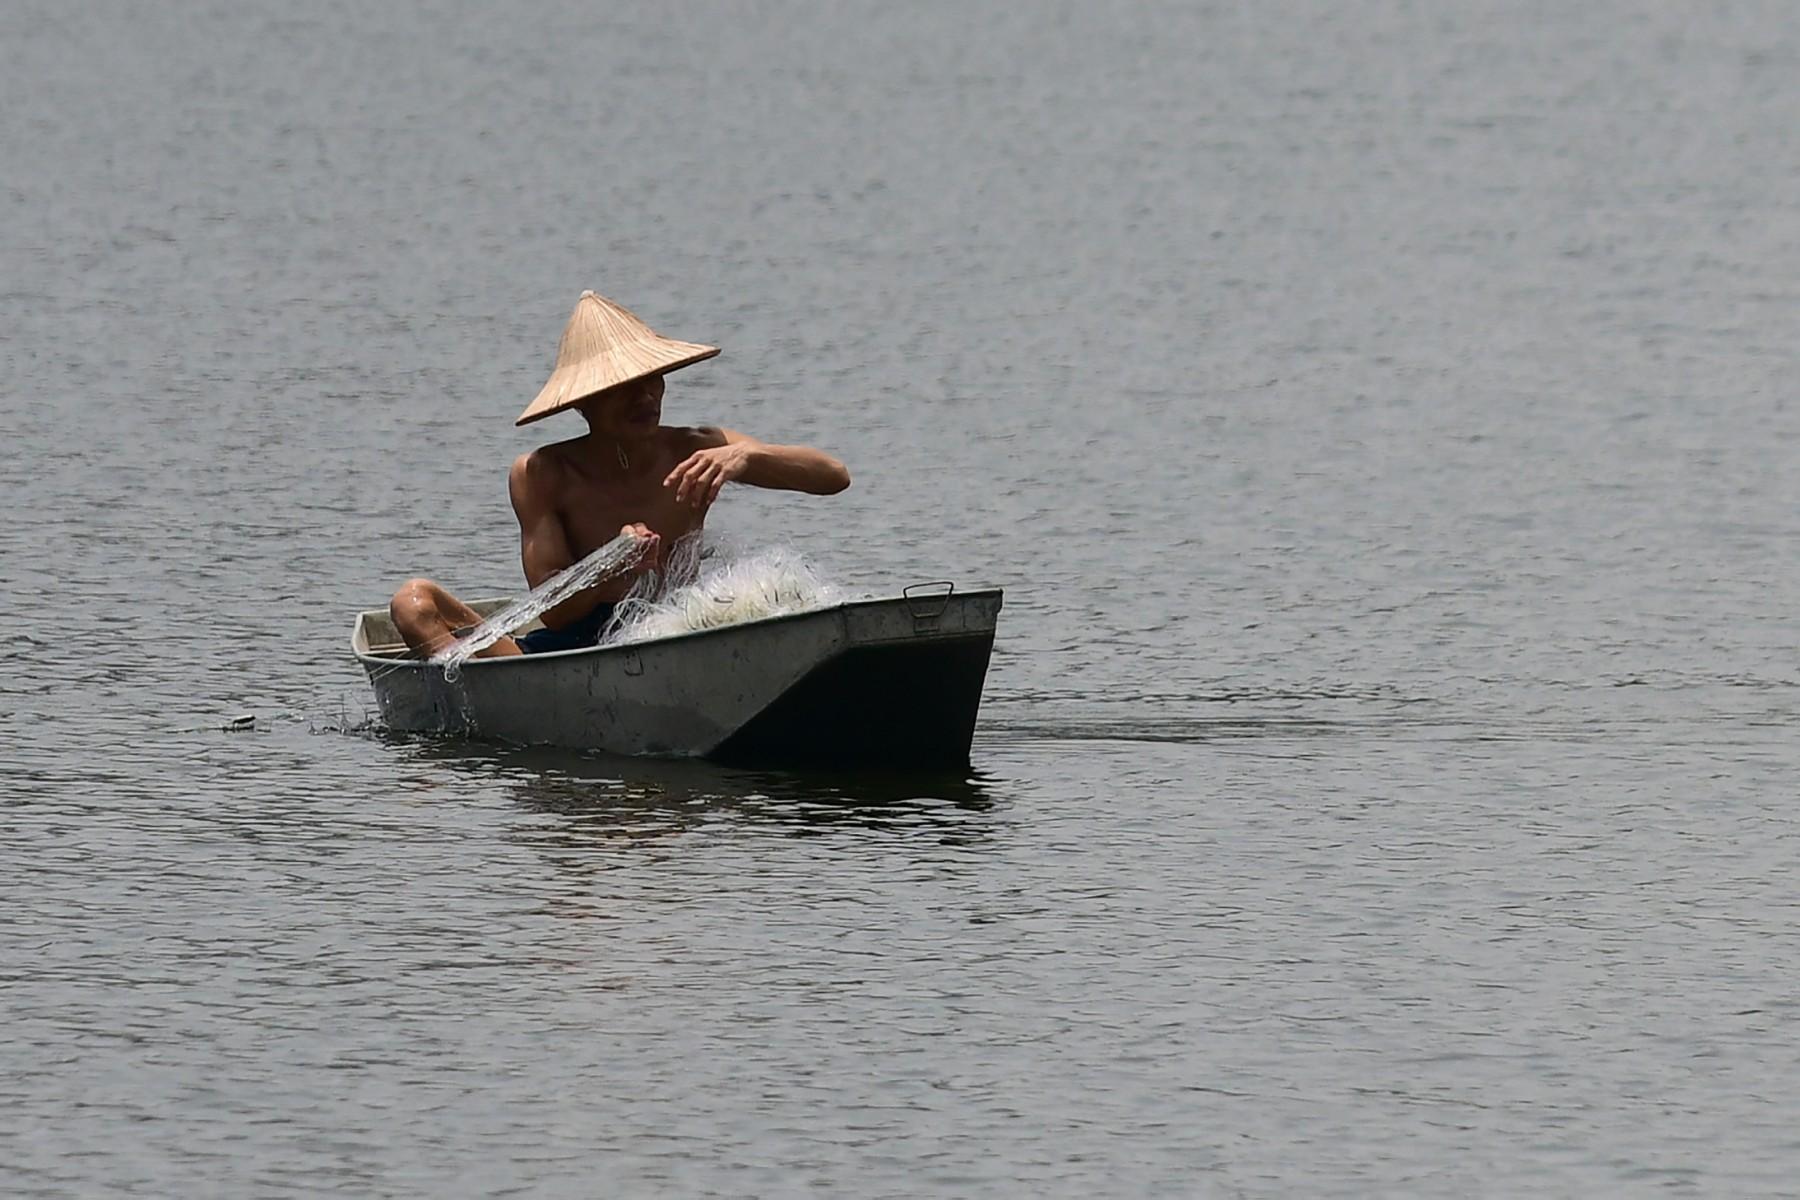 A fisherman works to catch fish on Truc Bach lake in Hanoi on May 11, 2021. Photo: AFP